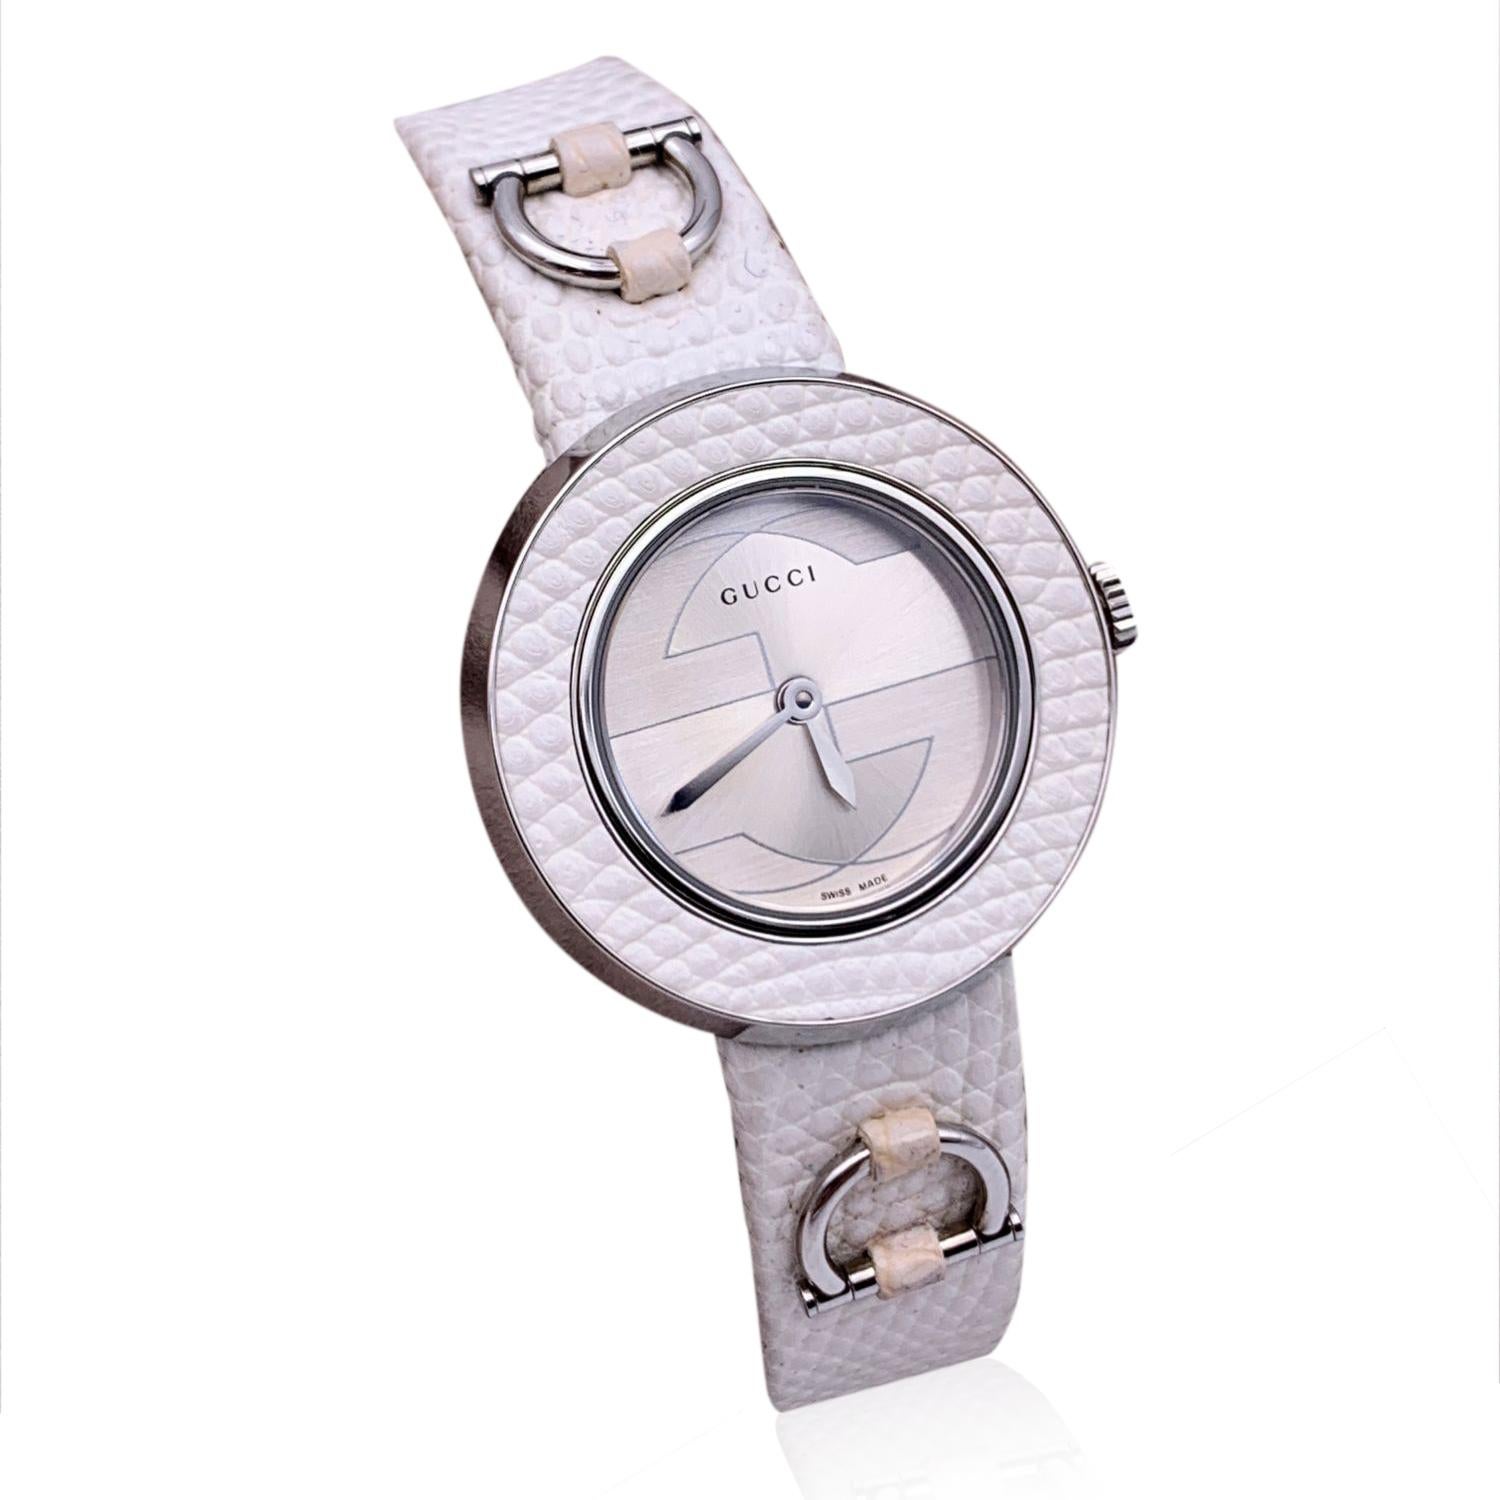 Gucci stainless steel watch. Mod. 129.5. Round case with GG logo on the dial and white leather bezel. Two hands. Sapphire crystal. Swiss Made Quartz movement. Gucci written on face. White leather strap. Adjustable strap. Water Resistant to 3 atm.